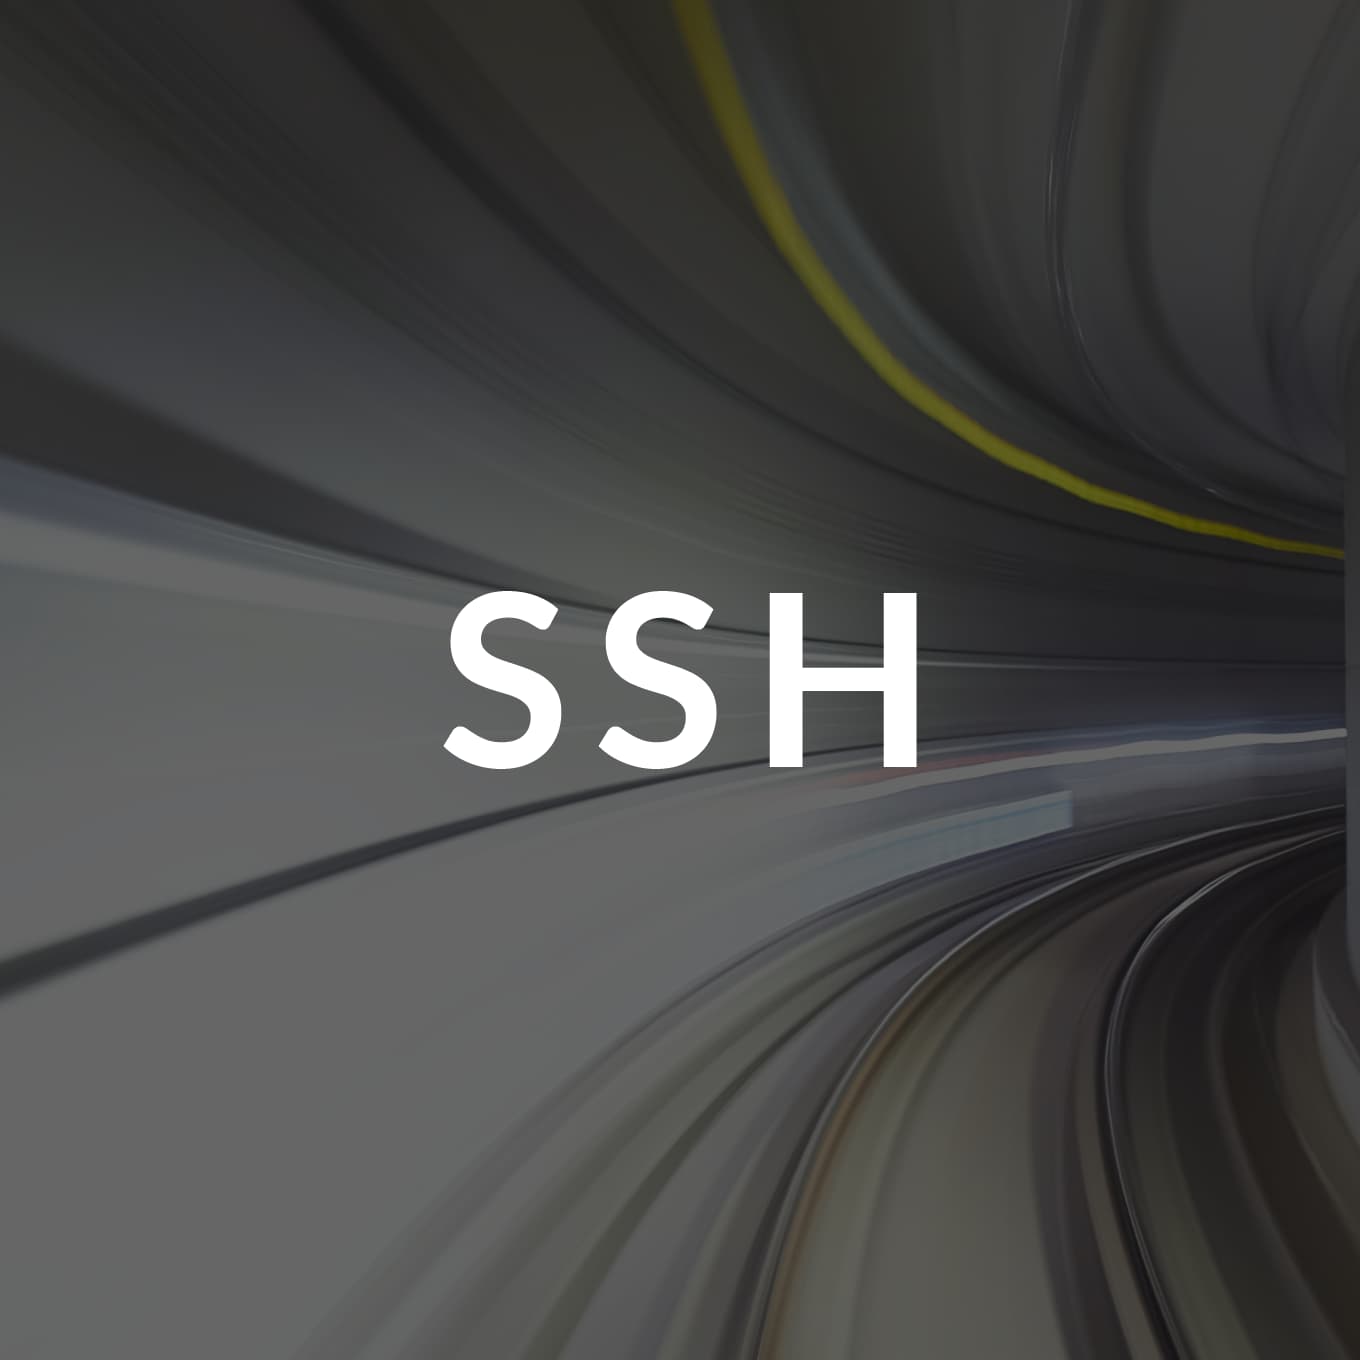 How to transfer files over SSH with rsync